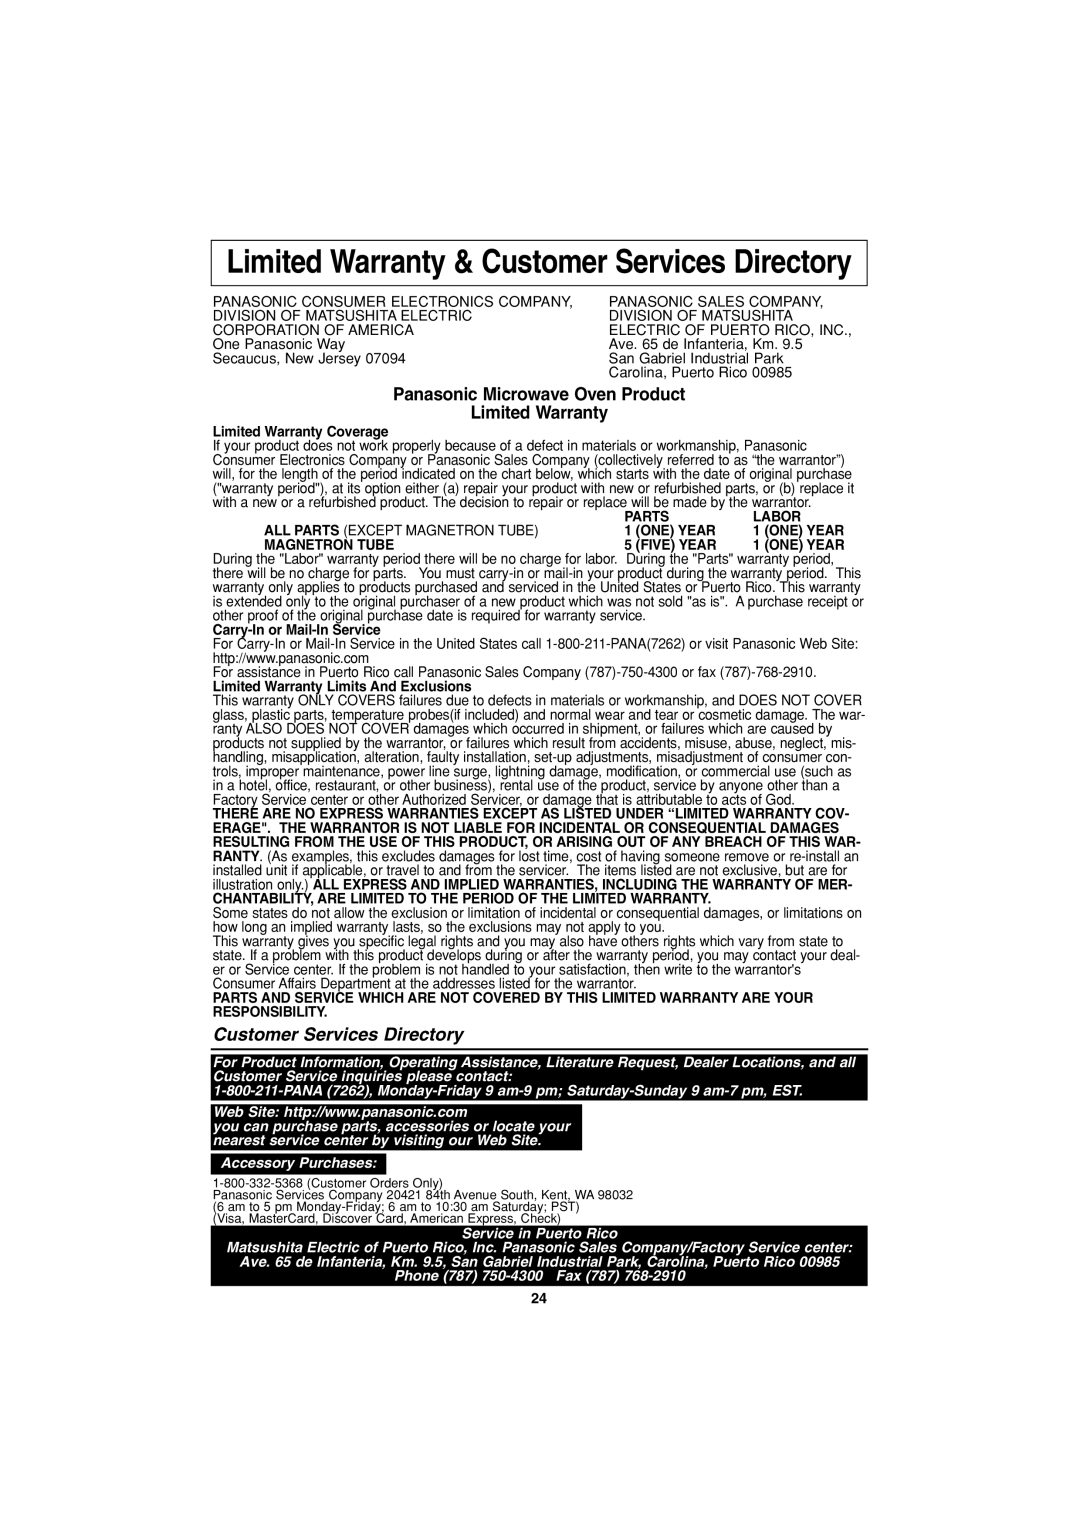 Panasonic NN-S423 Limited Warranty & Customer Services Directory, Panasonic Microwave Oven Product Limited Warranty 